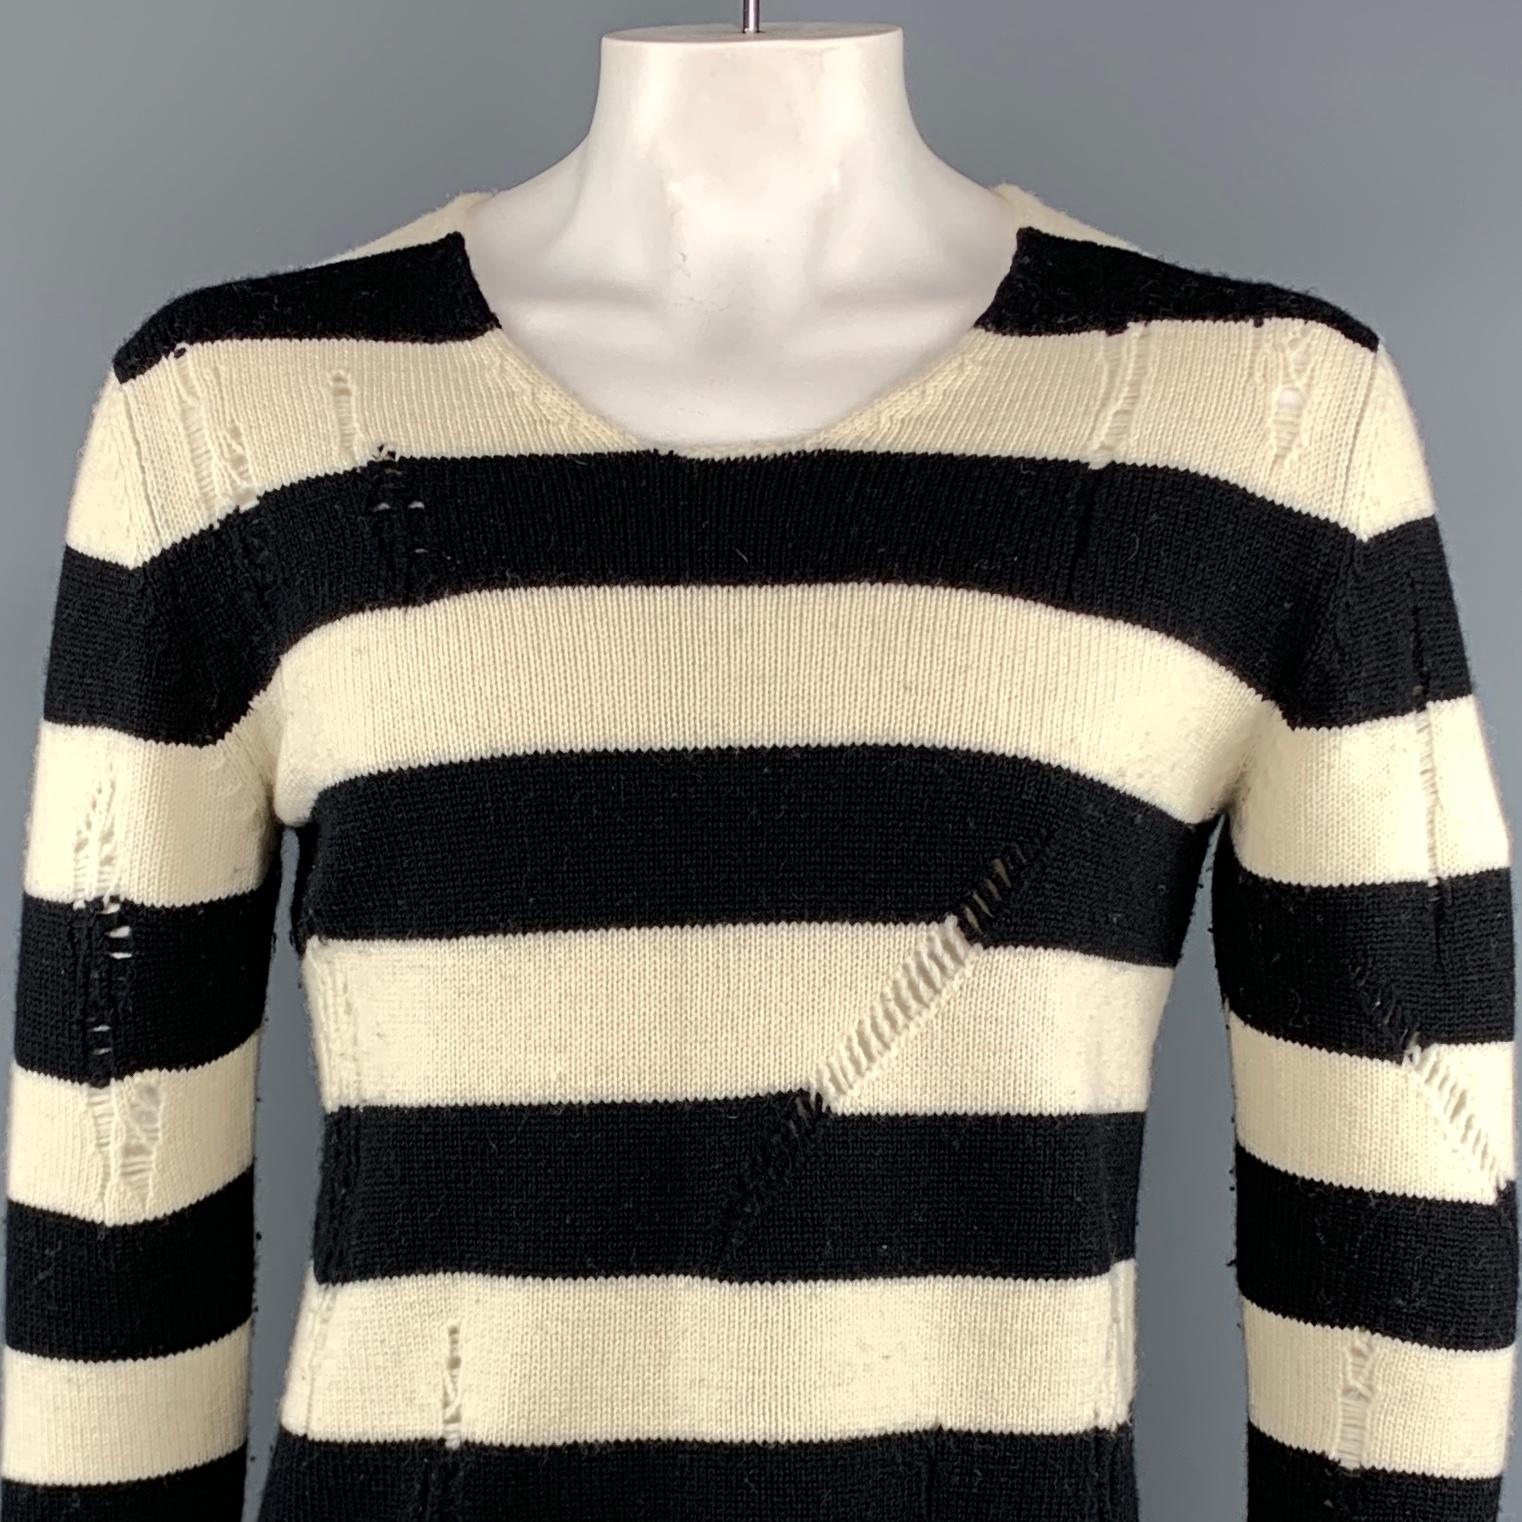 JUNYA WATANABE sweater comes in black and white stripe wool featuring distressed details throughout and a round neck. AD2014. Made in Japan.
 
Excellent Pre-Owned Condition.
Marked: L
 
Measurements:
 
Shoulder: 19.5 in.
Chest: 44 in.
Sleeve: 28